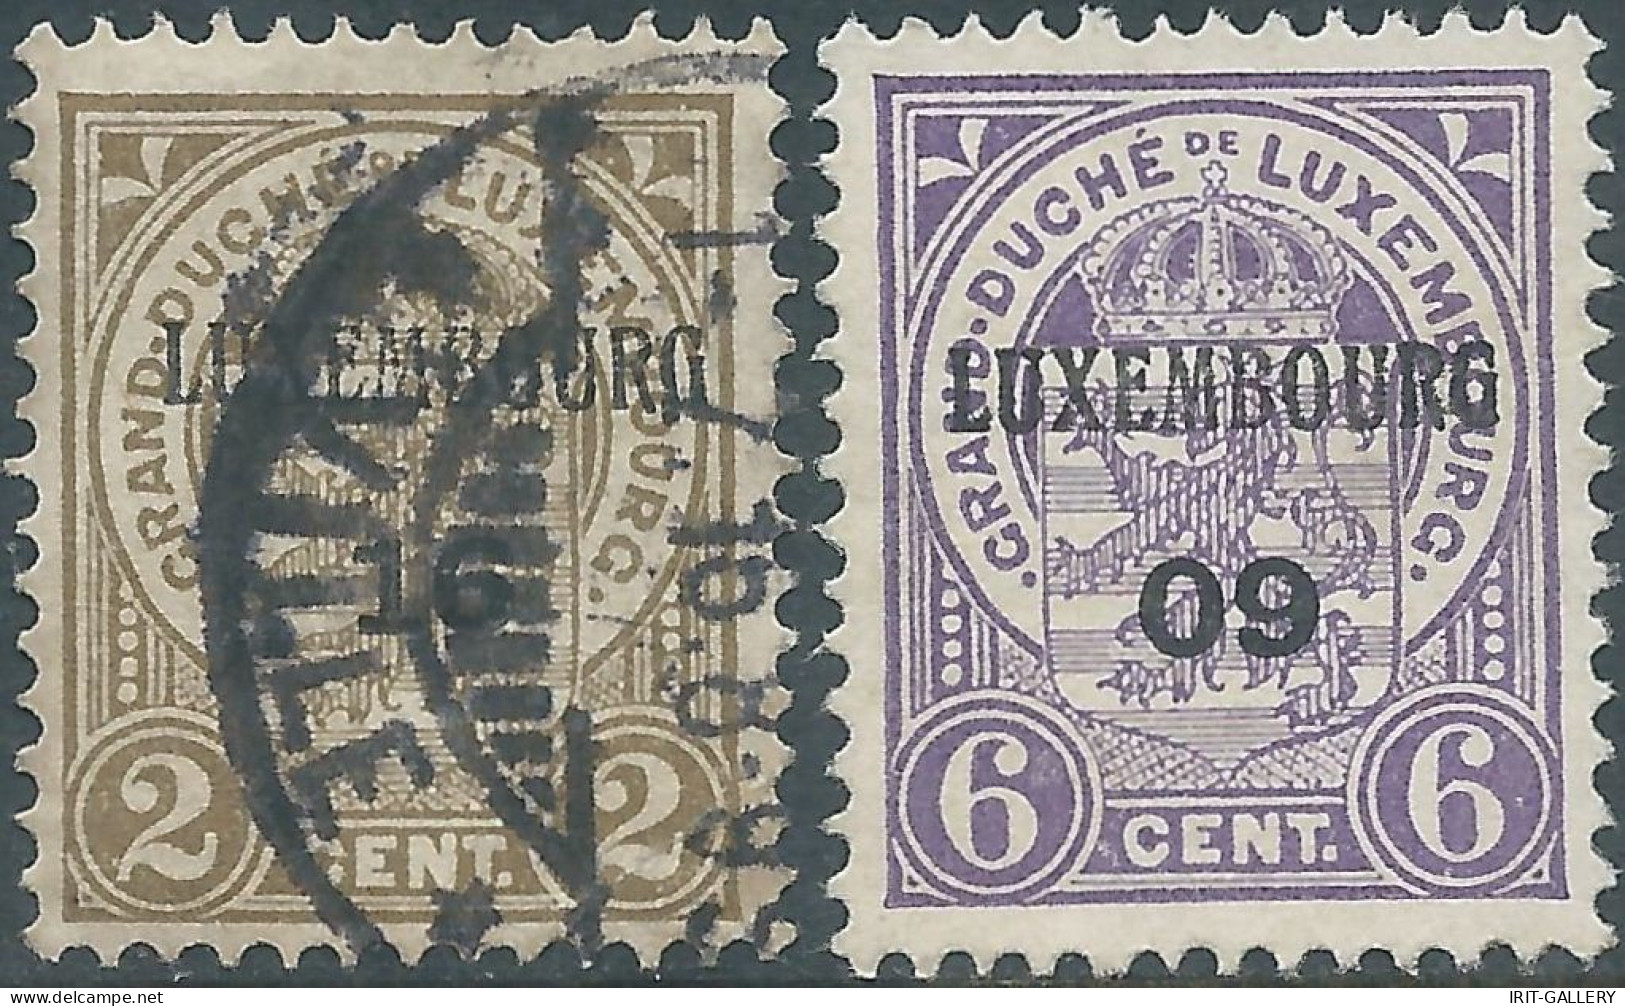 Lussemburgo - Luxembourg - 1912 Coat Of Arms,Overprinted On 2C Obliterated  & 6C Mint - 1907-24 Coat Of Arms